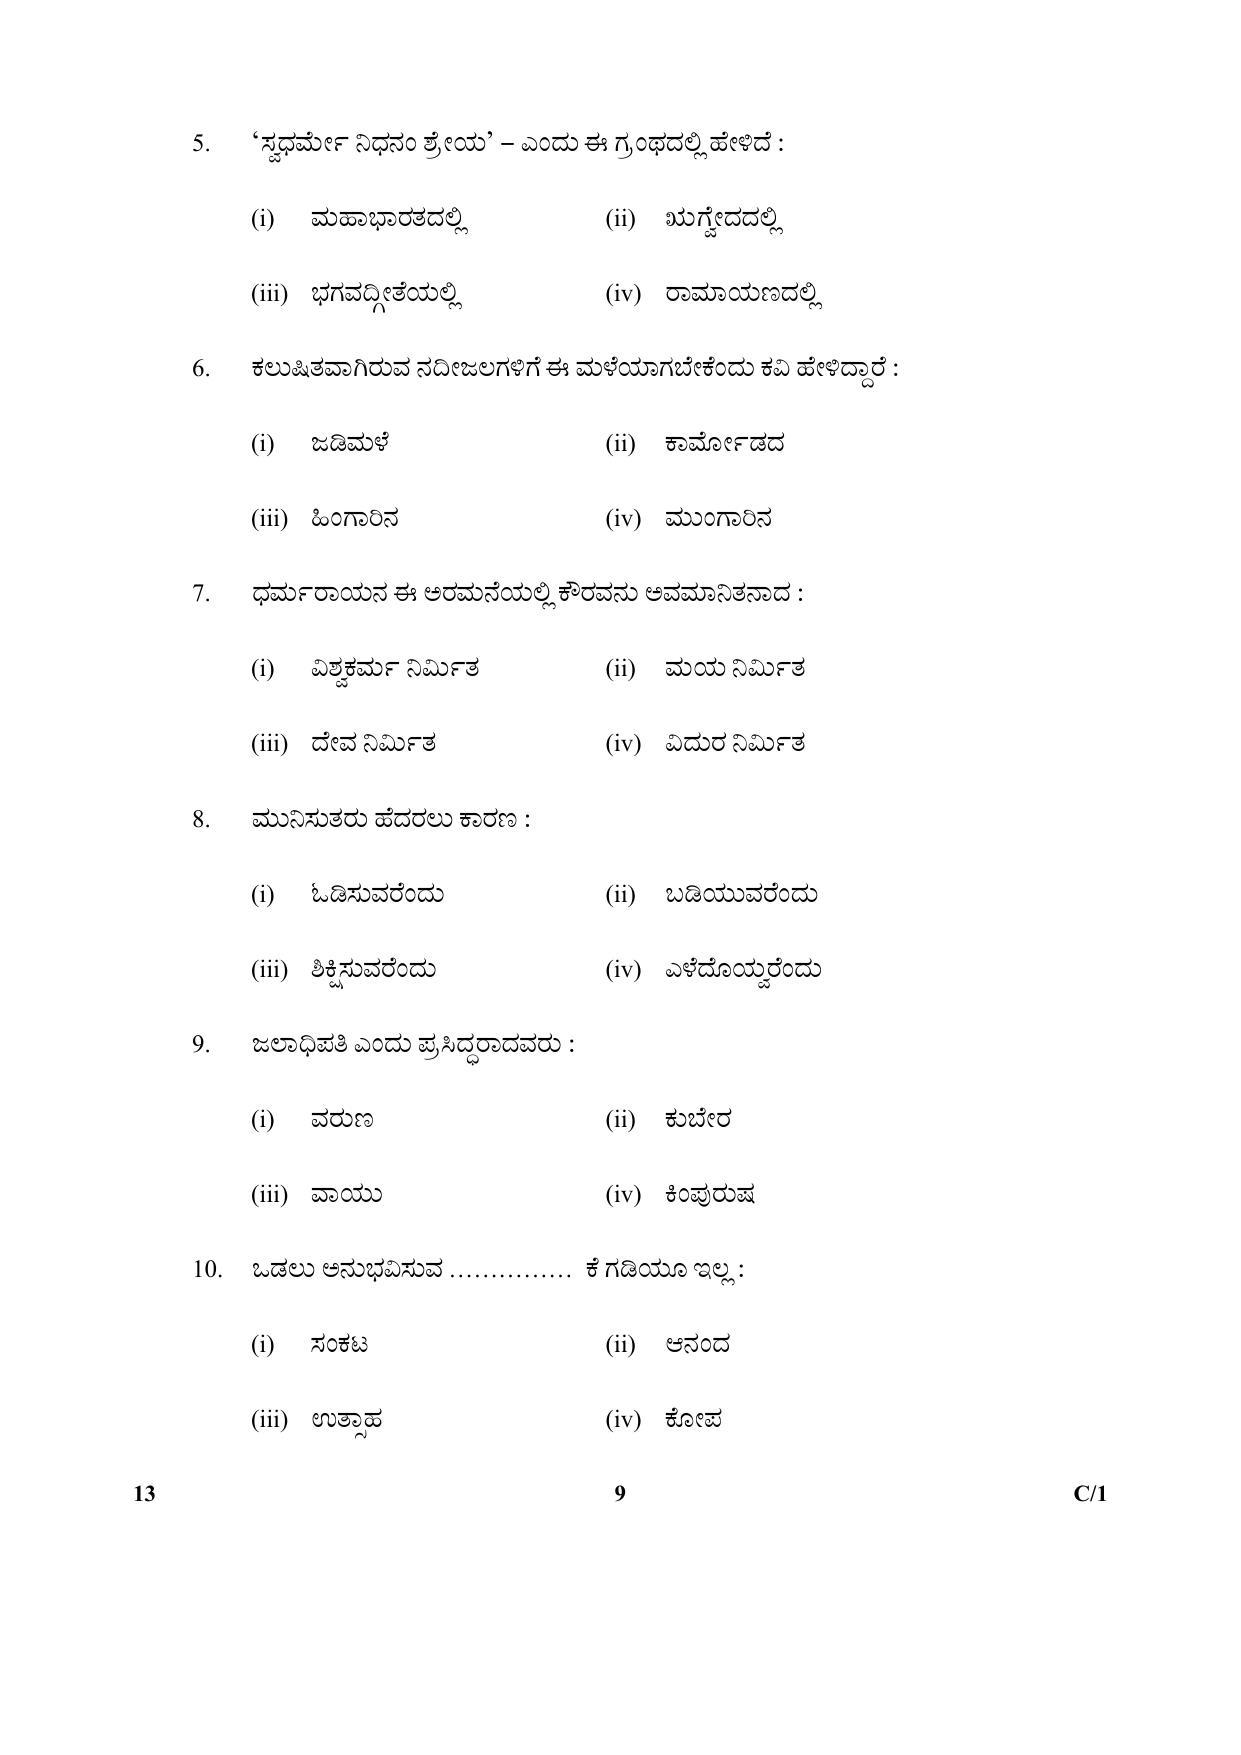 CBSE Class 10 13 (Kannada) 2018 Compartment Question Paper - Page 9